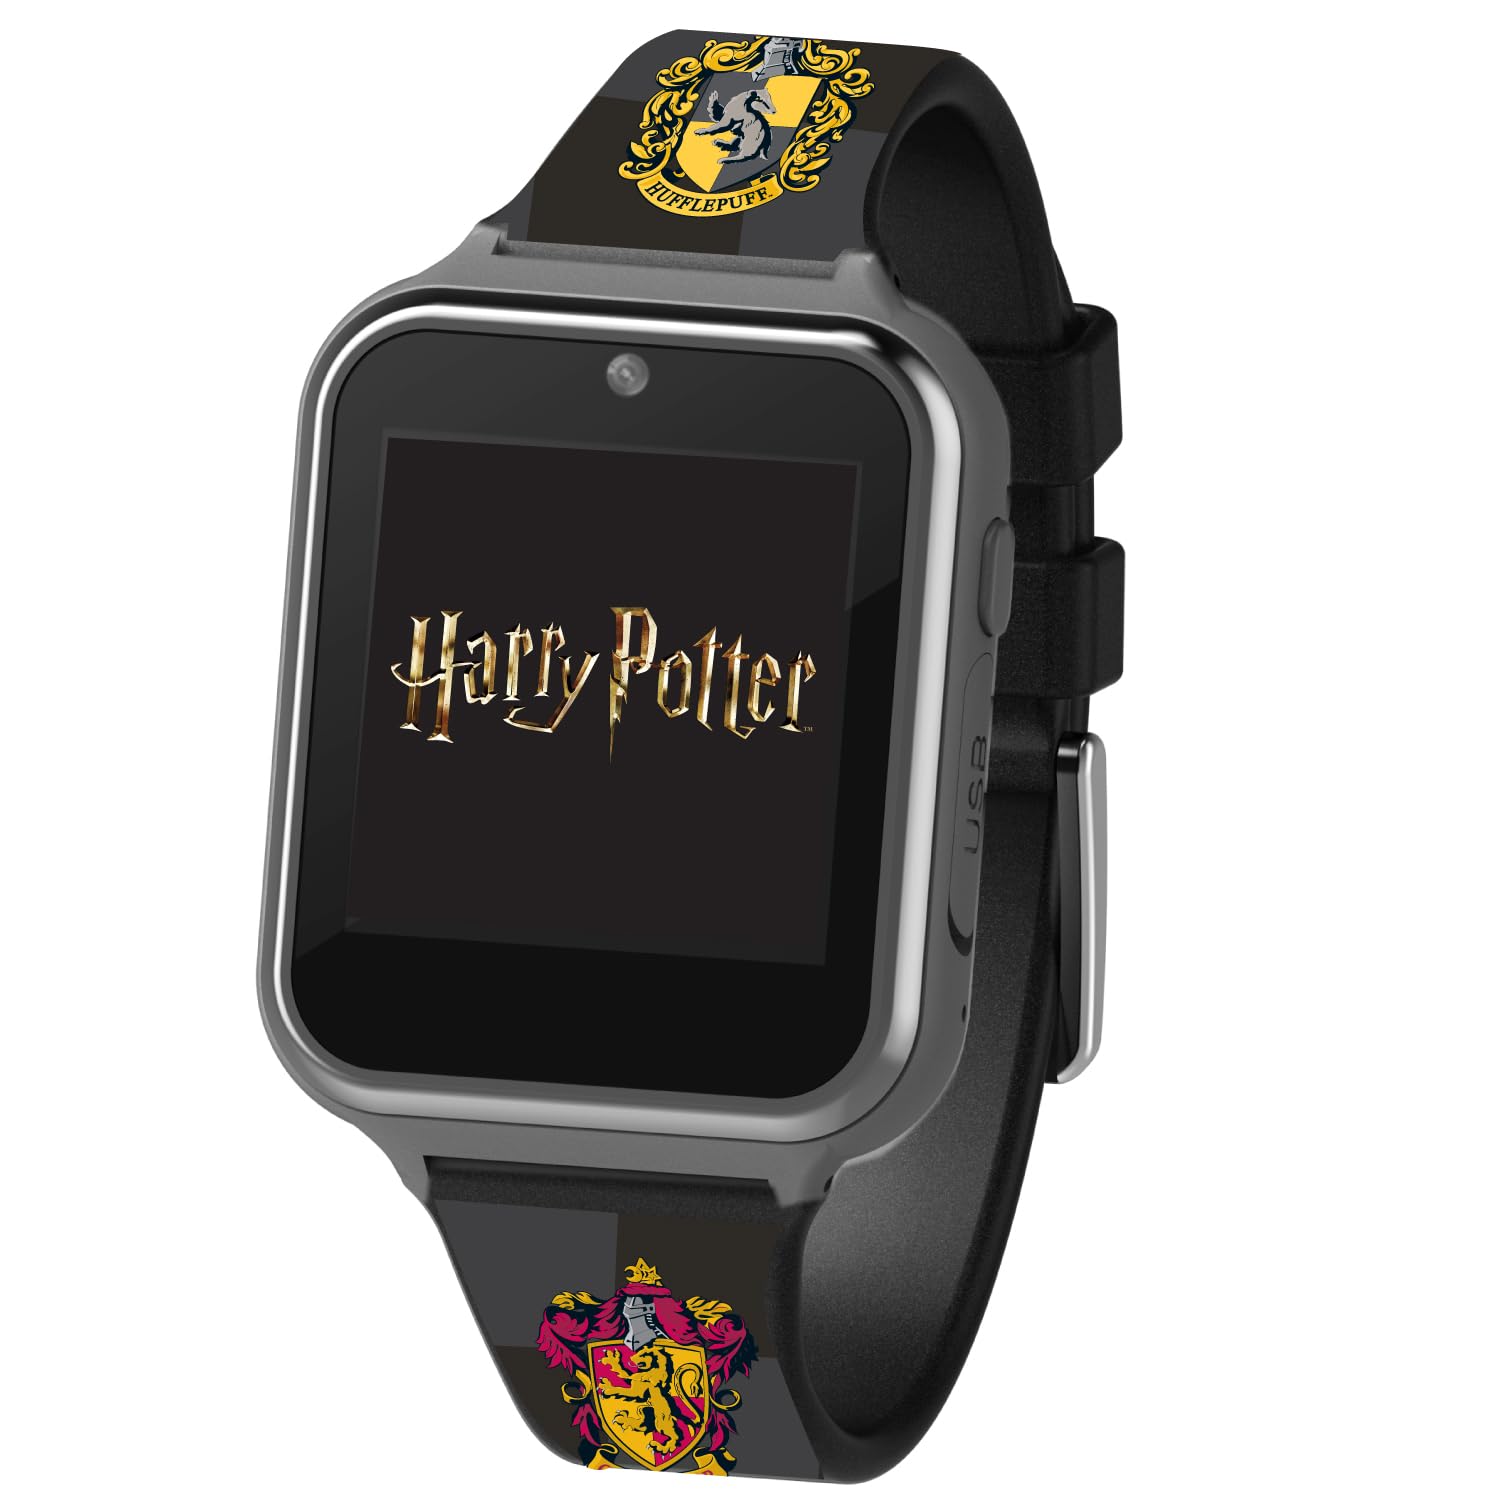 Accutime Harry Potter Educational Learning Touchscreen Kids Smartwatch - Black Strap, Toy - Girls, Boys, Toddlers - Selfie Cam, Games, Alarm, Calculator, Pedometer (Model: HP4107AZ)